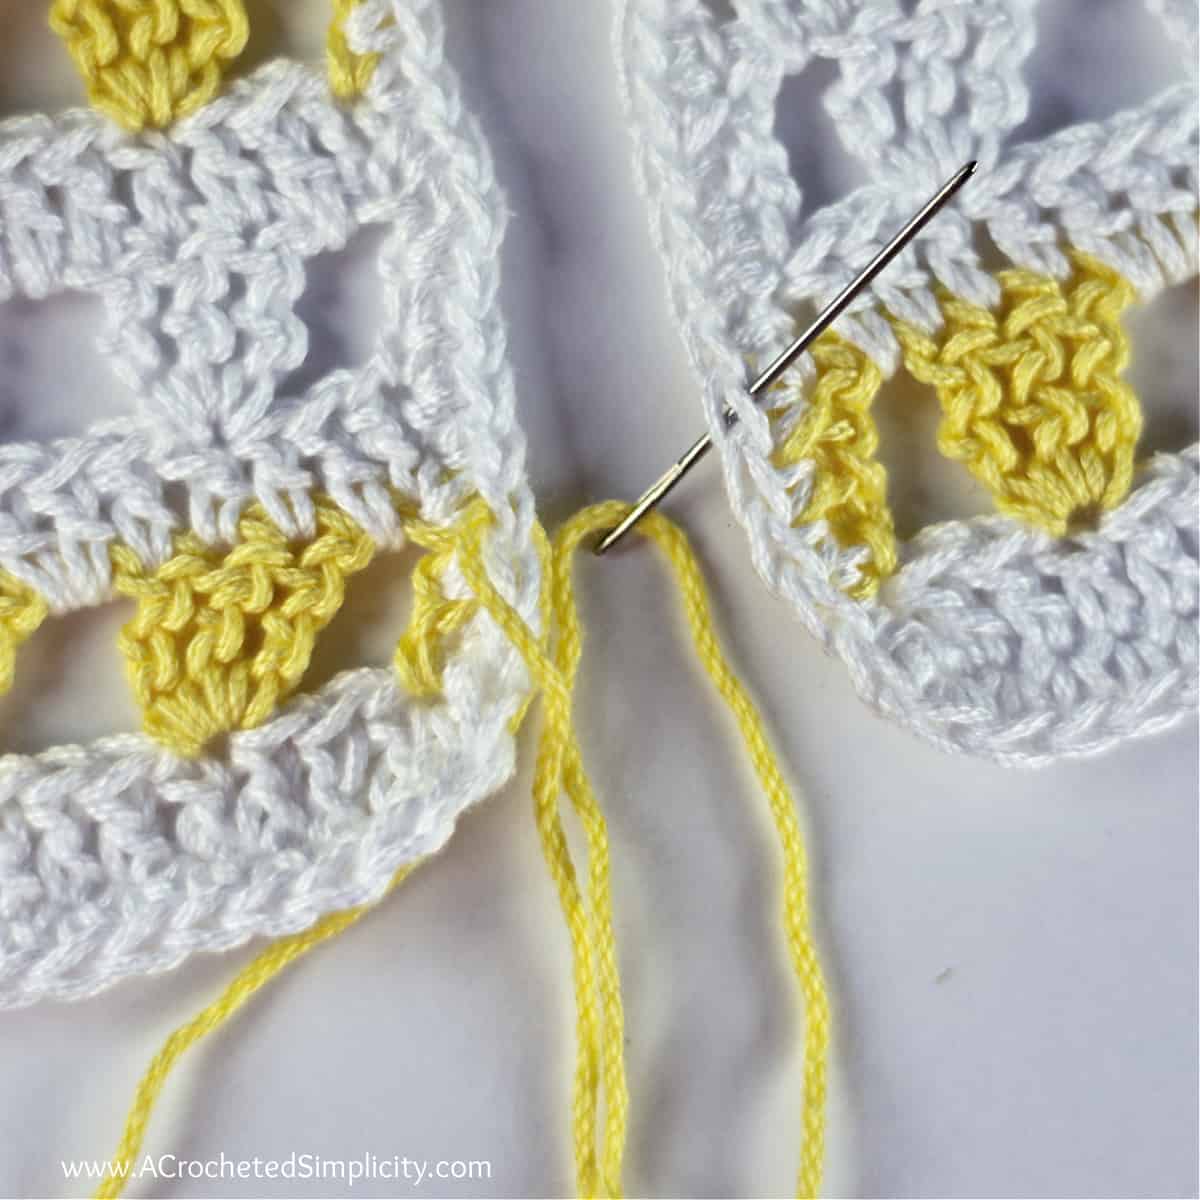 A needle with yellow yarn is inserted from bottom to top into the edge of the piece on the right.